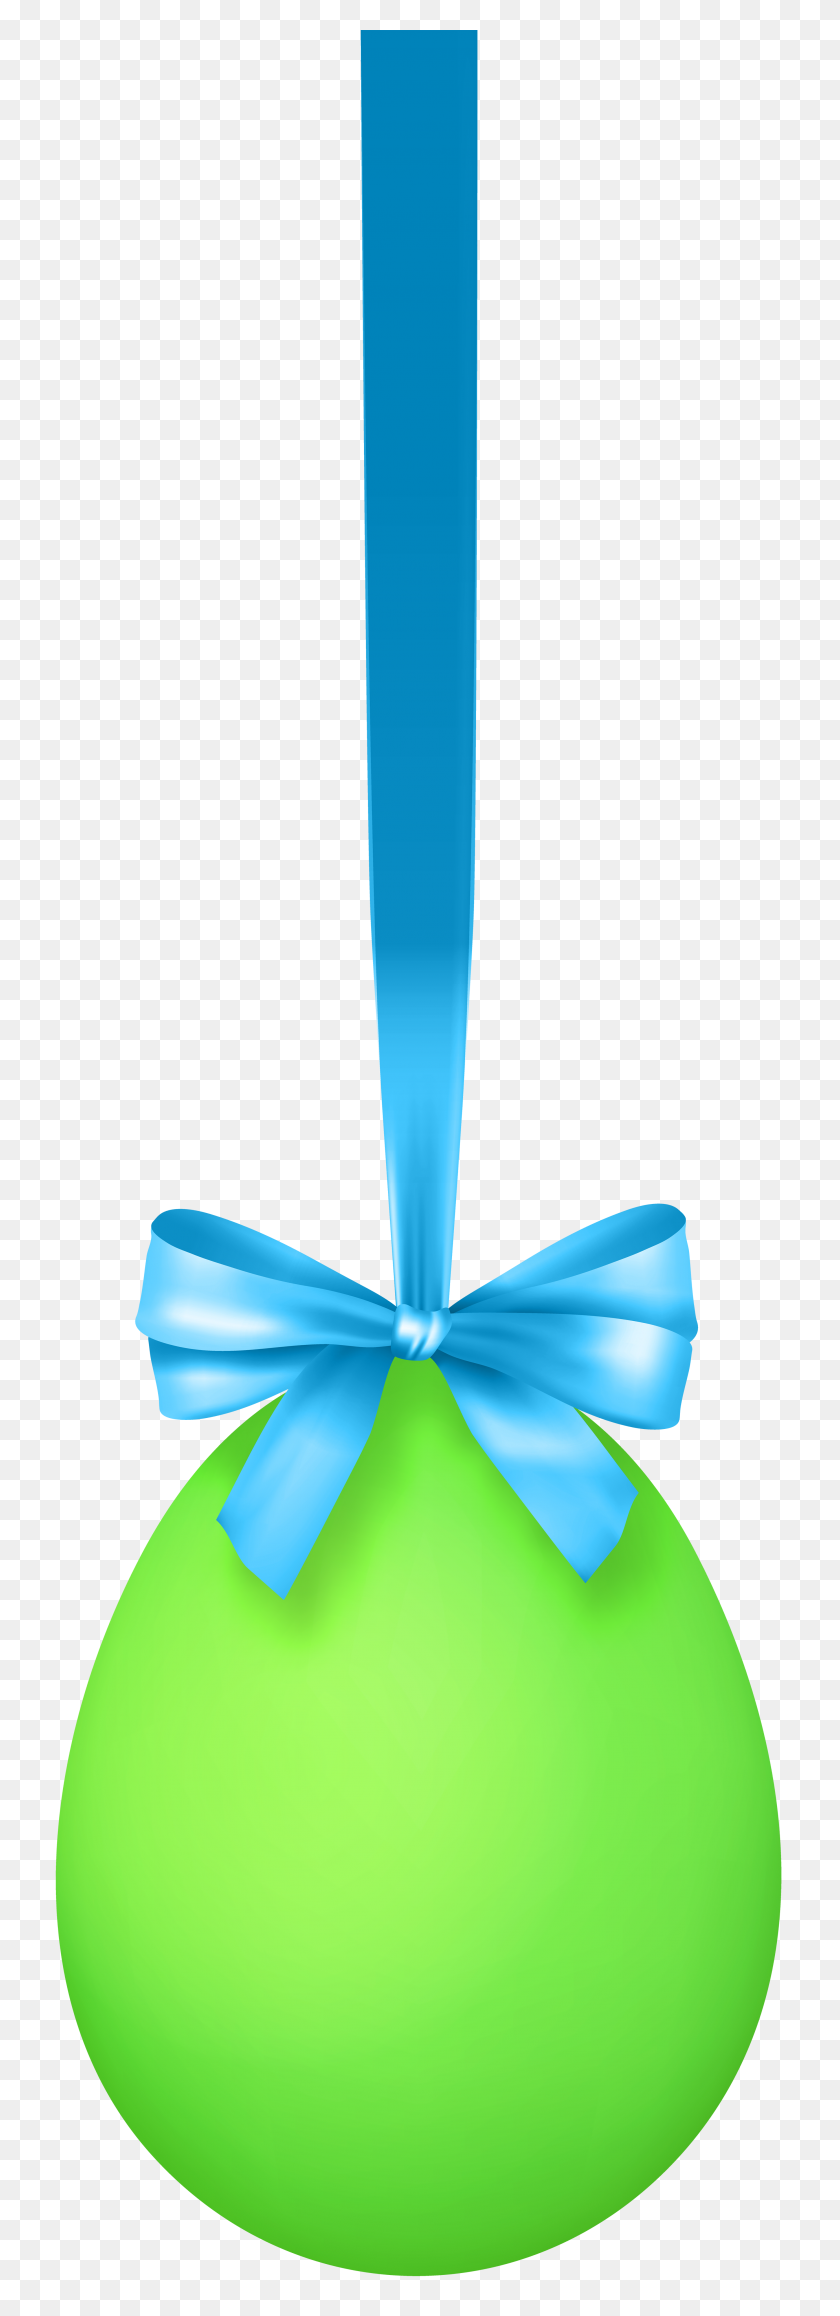 2765x8000 Green Hanging Easter Egg With Bow Transparent Clip Art Image - Hanging Stars Clipart